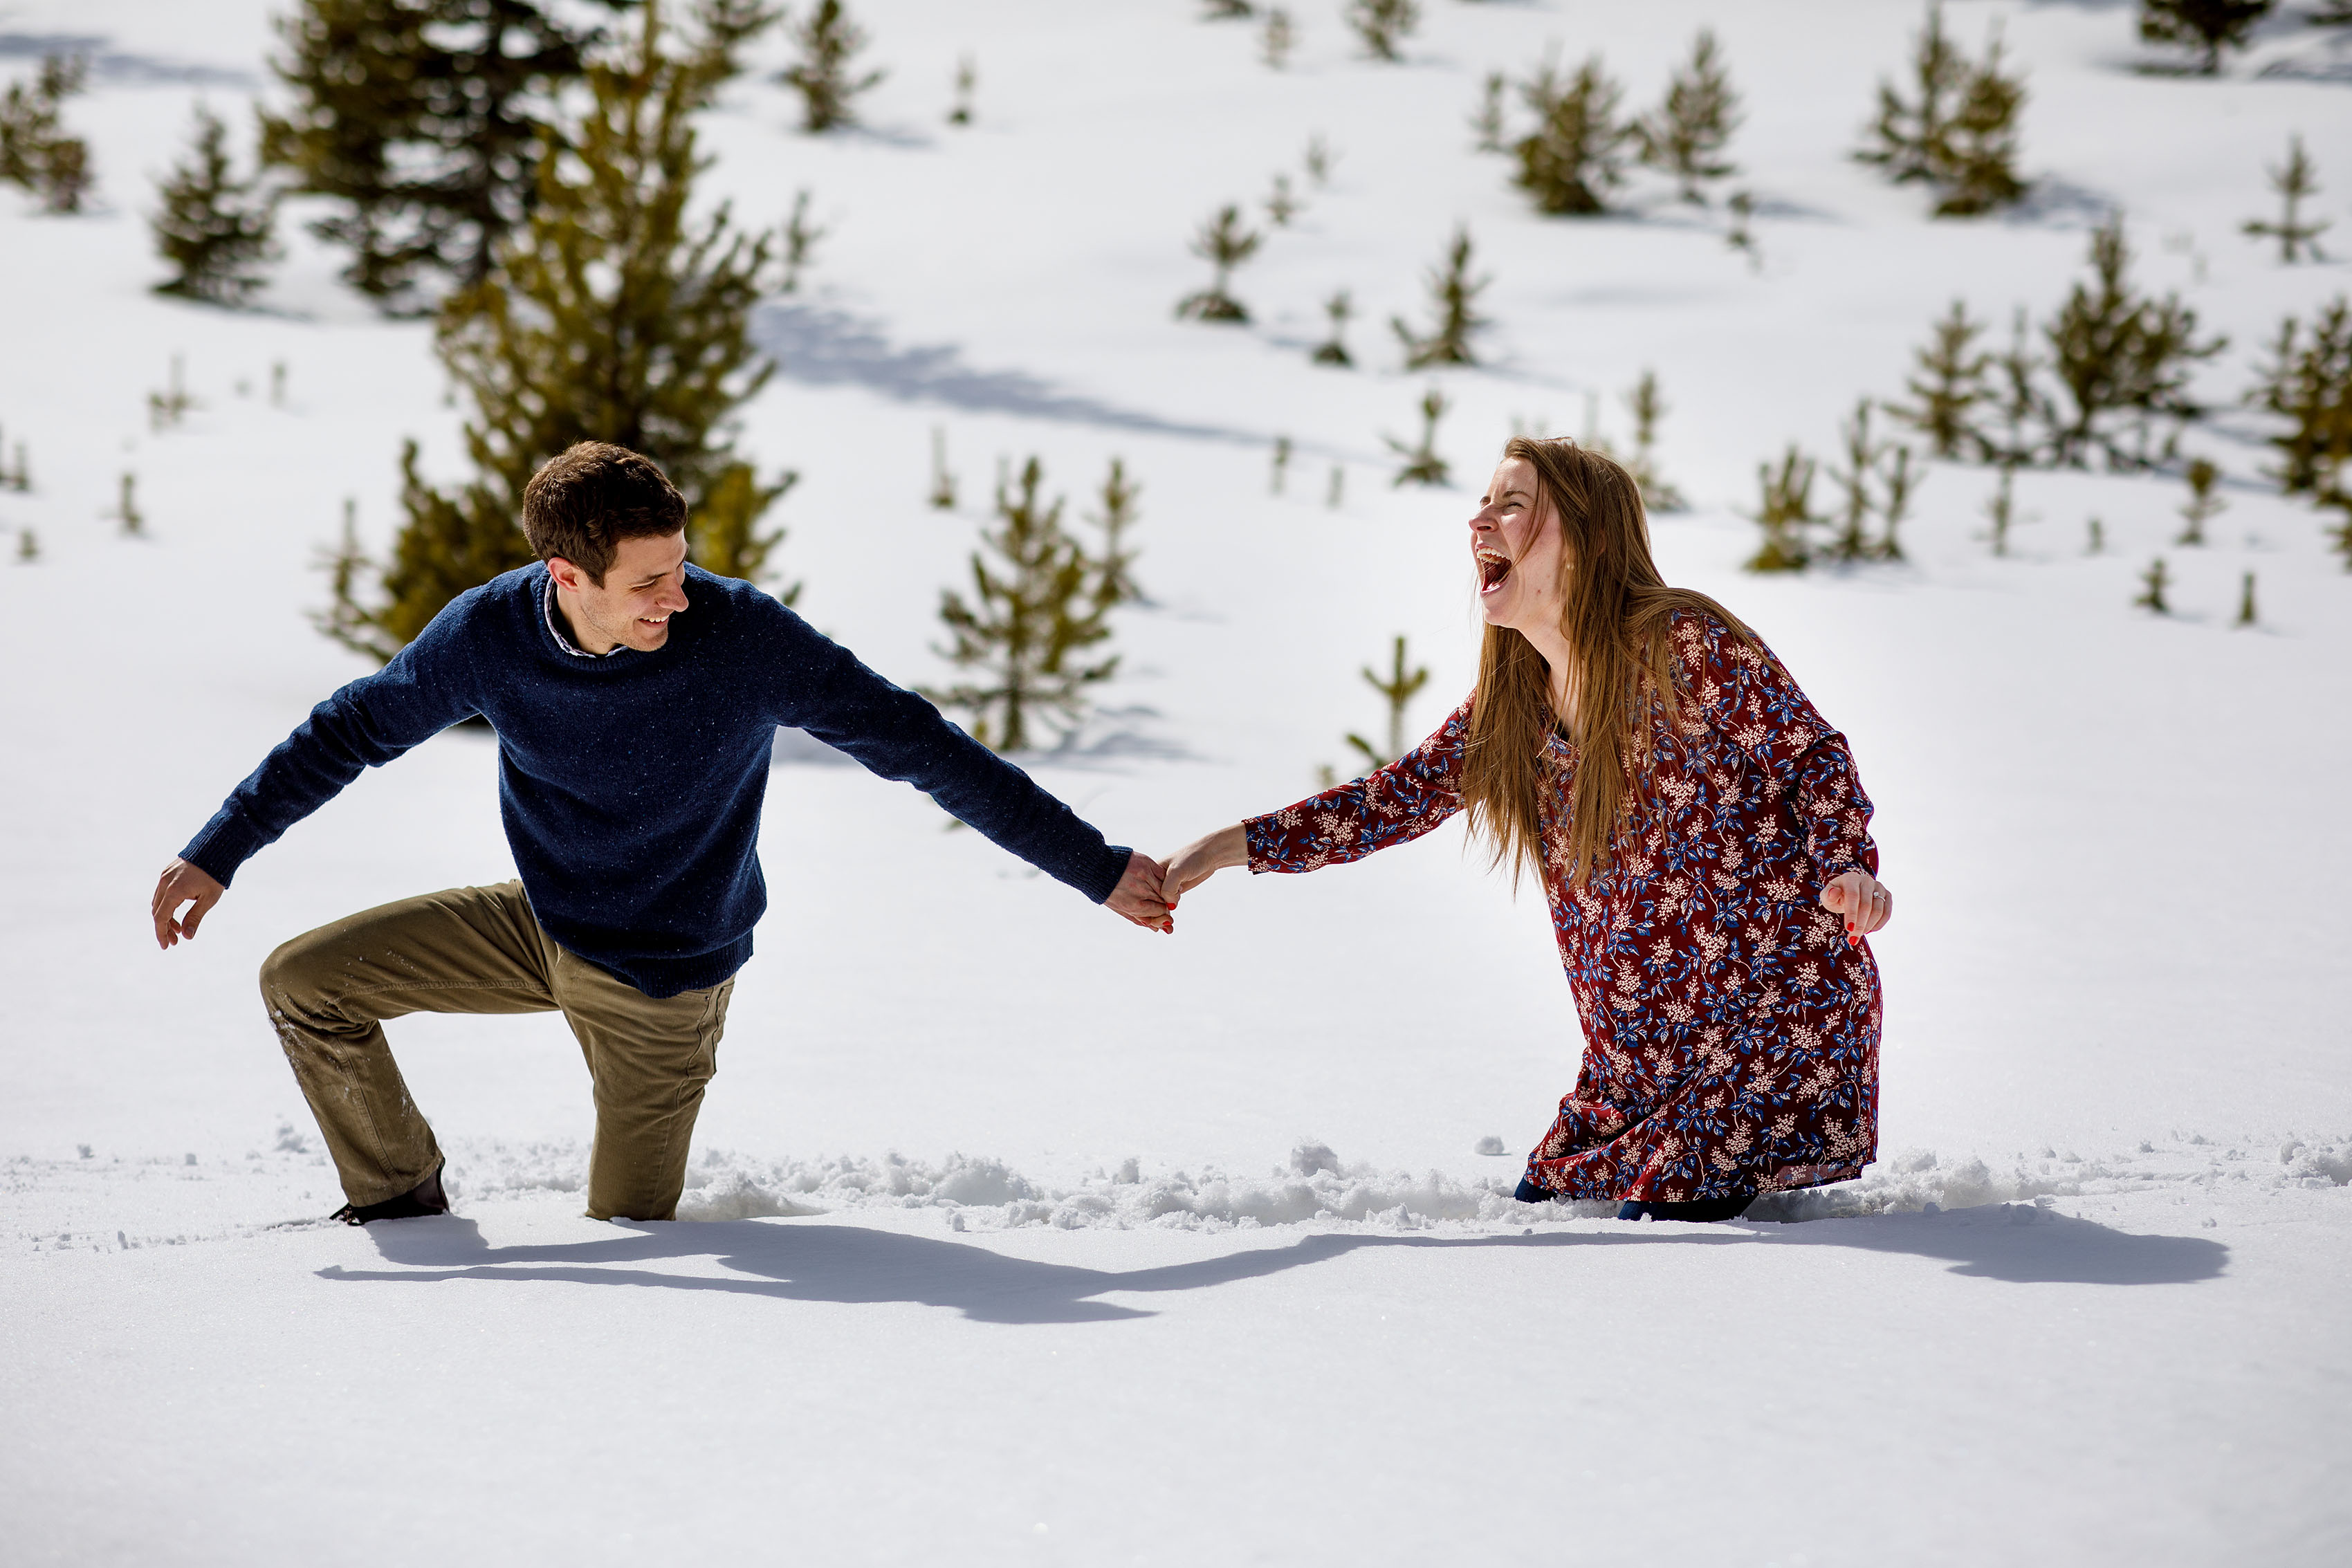 Jessica reacts after falling in the snow with Mike during their engagement session in Dillon